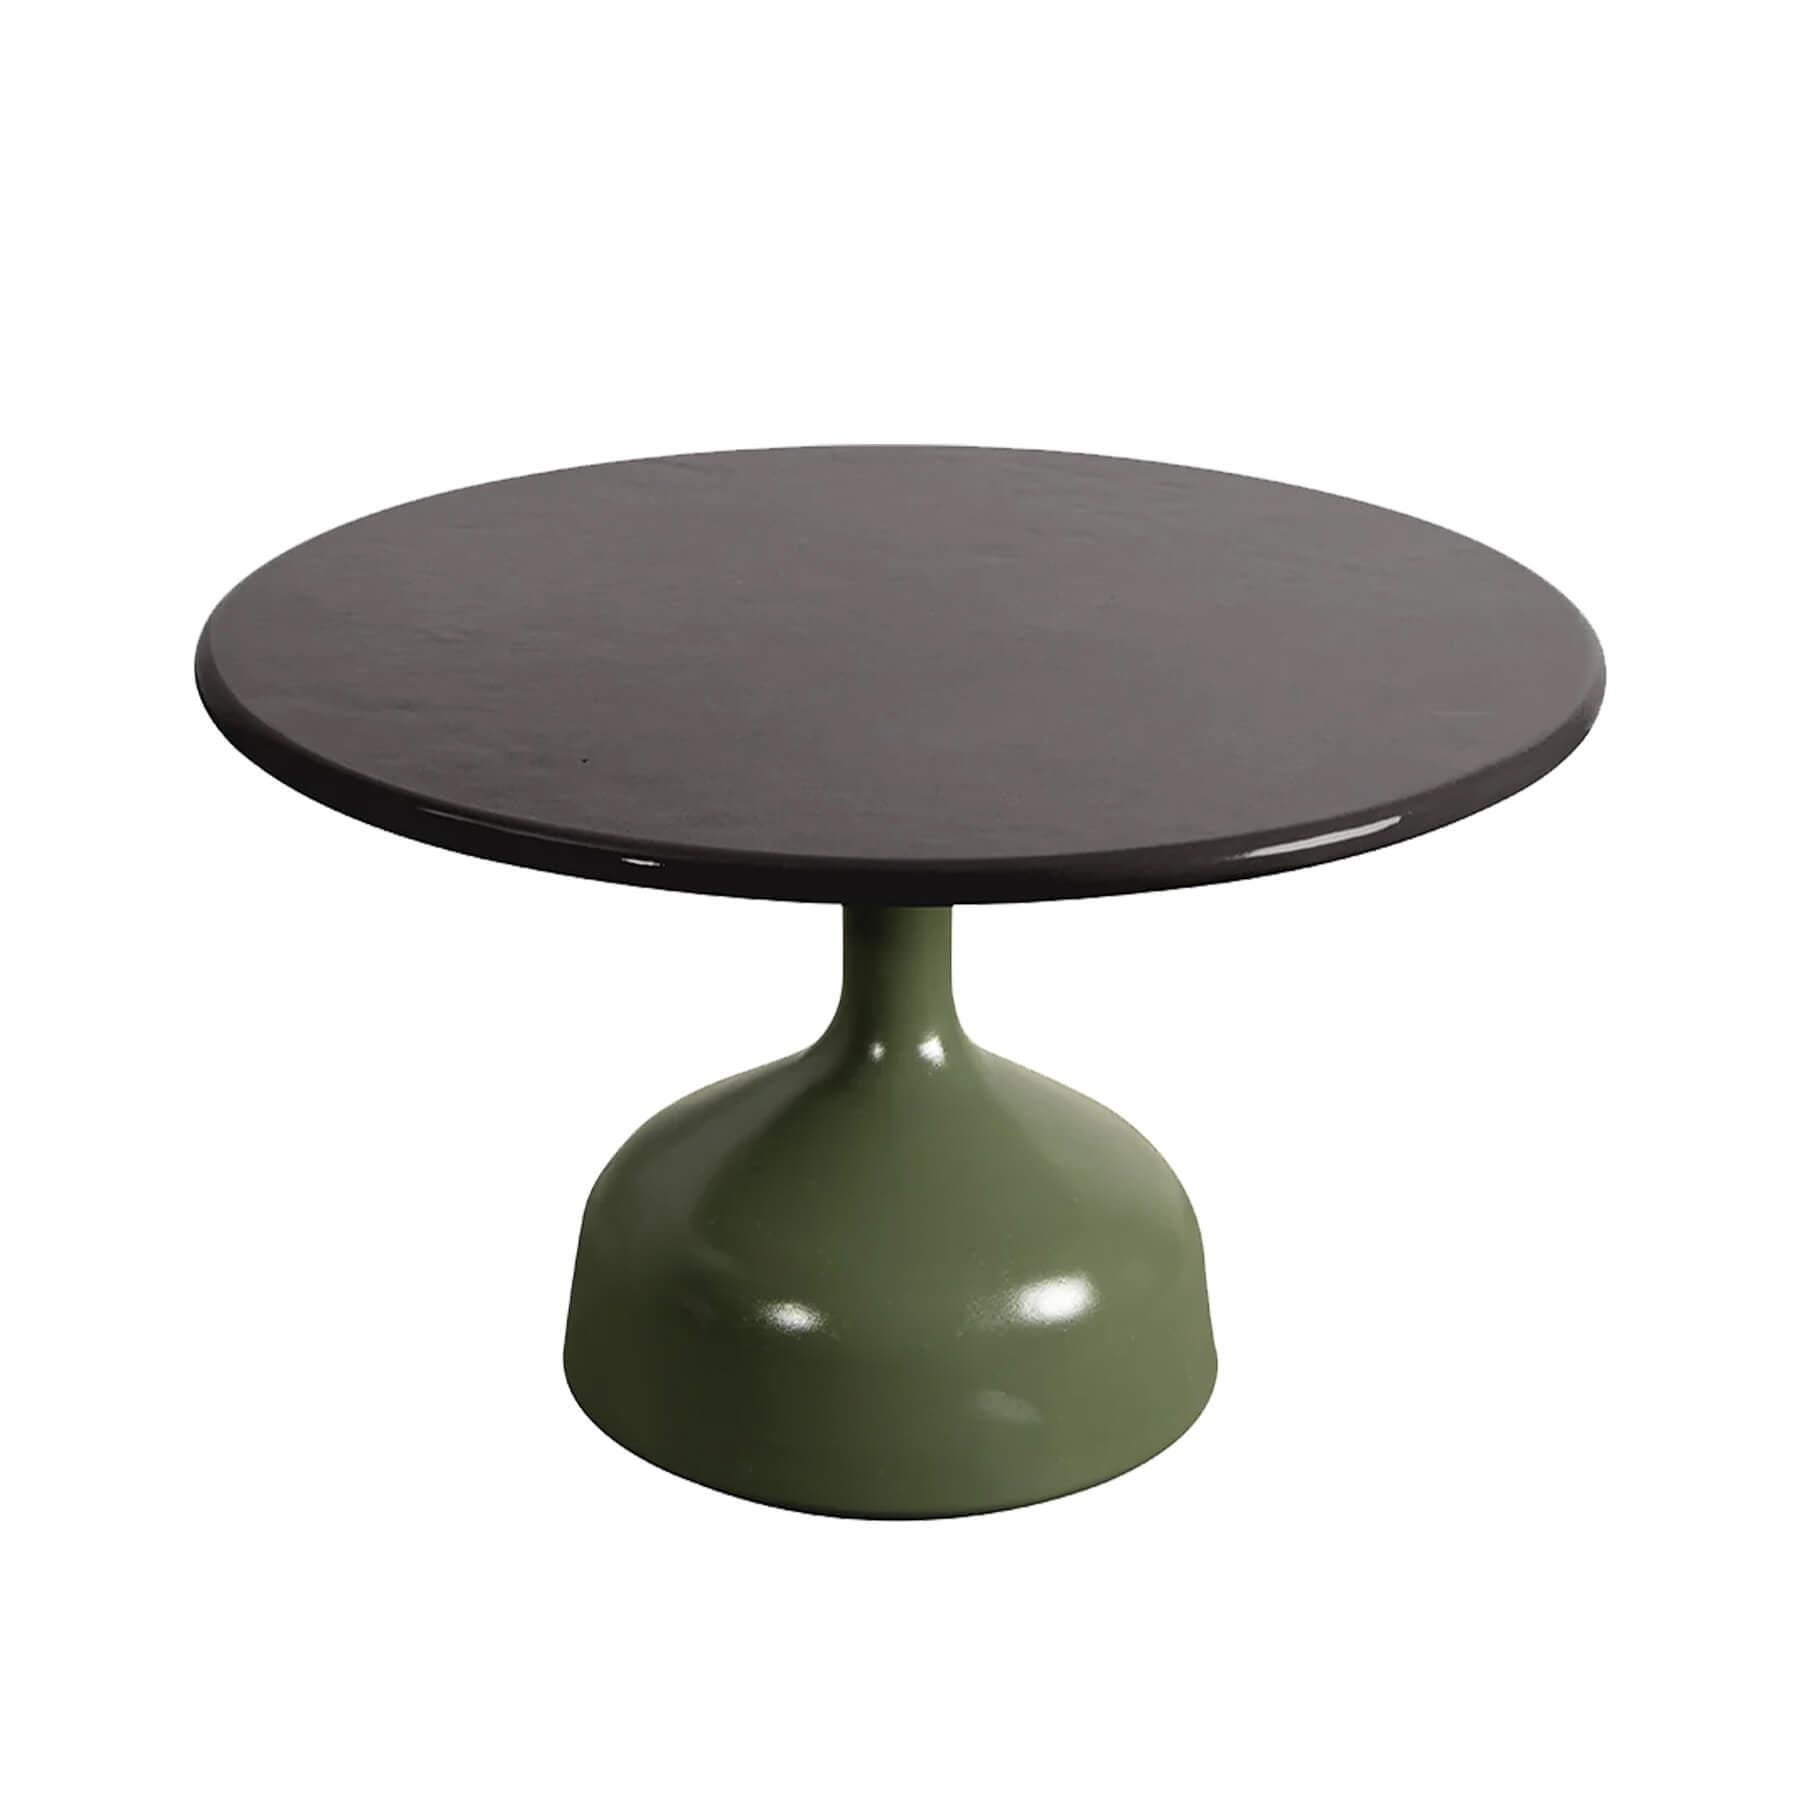 Caneline Glaze Coffee Table Large Olive Green Base Black Lava Stone Top Designer Furniture From Holloways Of Ludlow